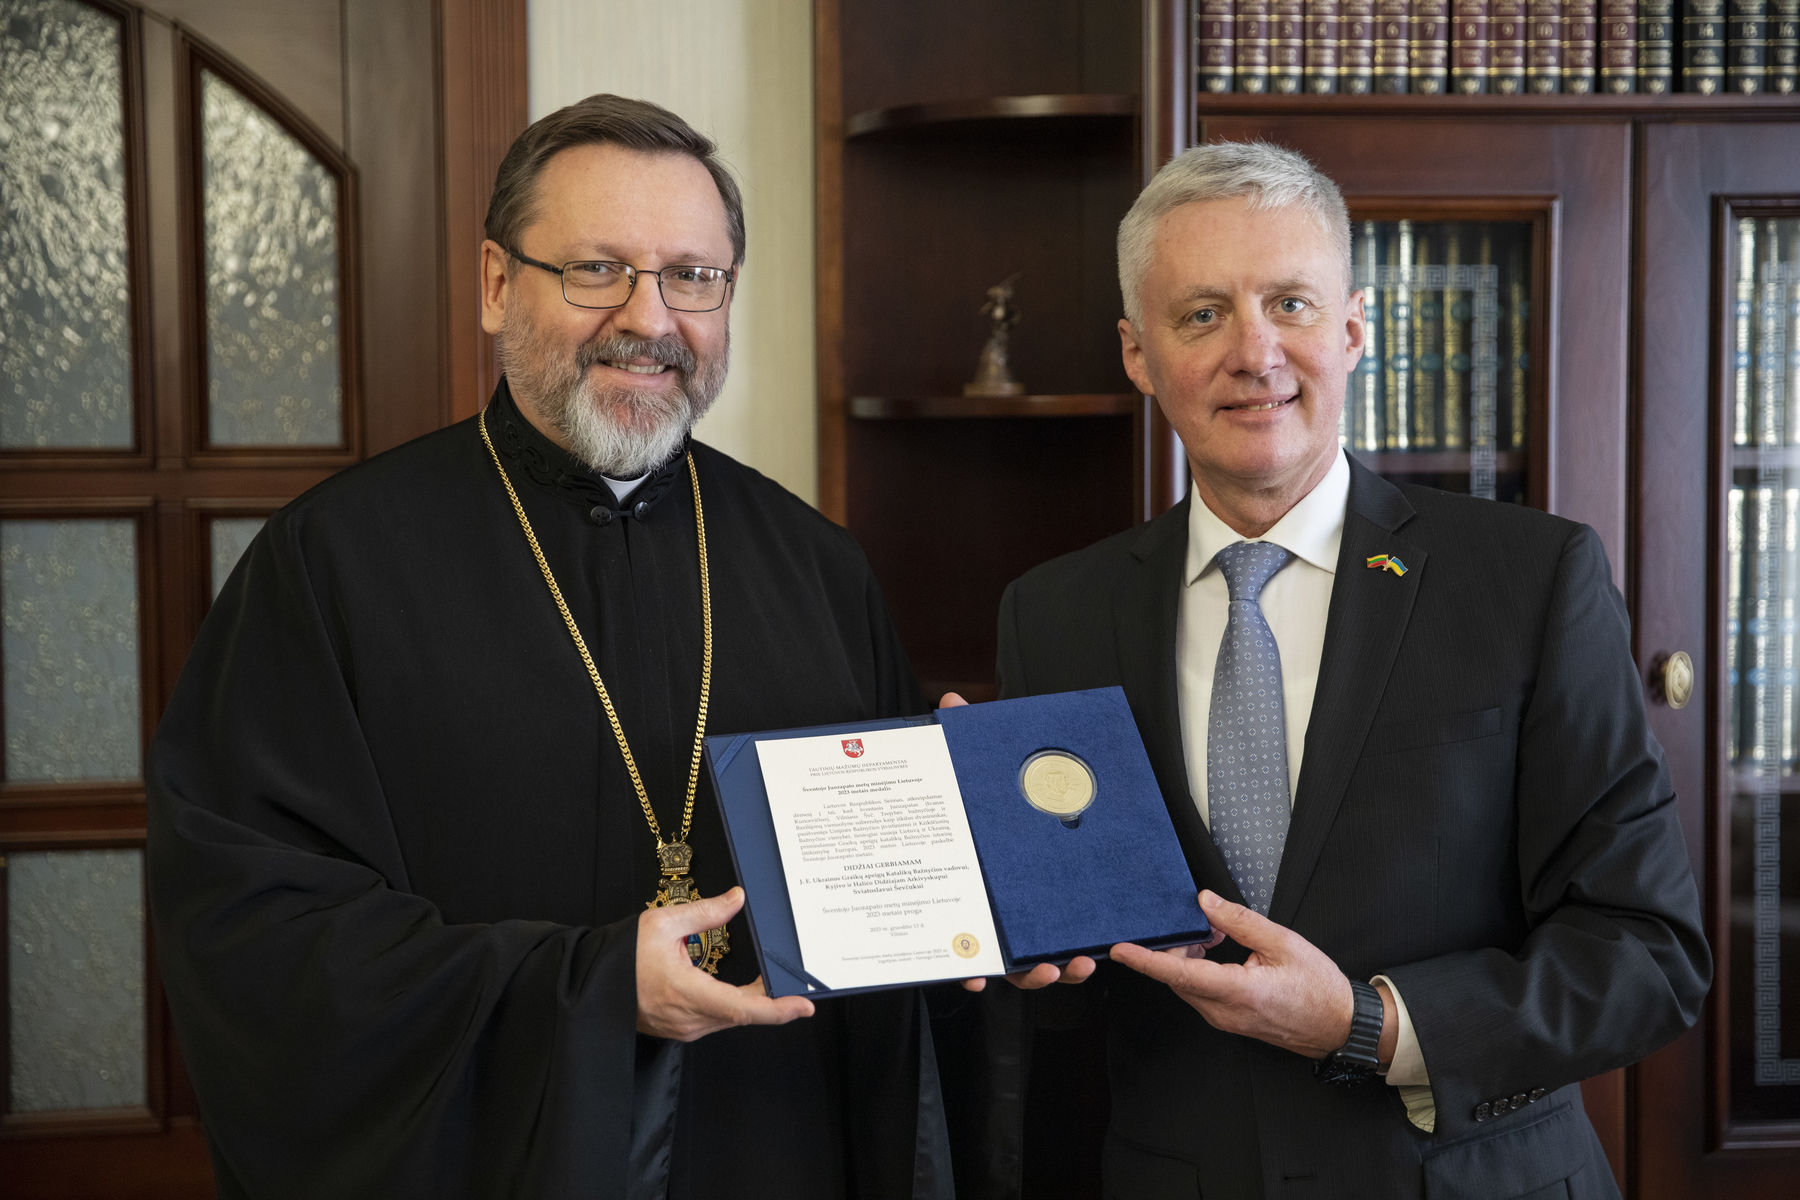 Lithuanian Ambassador presents Head of the UGCC with a commemorative medal marking St. Josaphat’s anniversary 